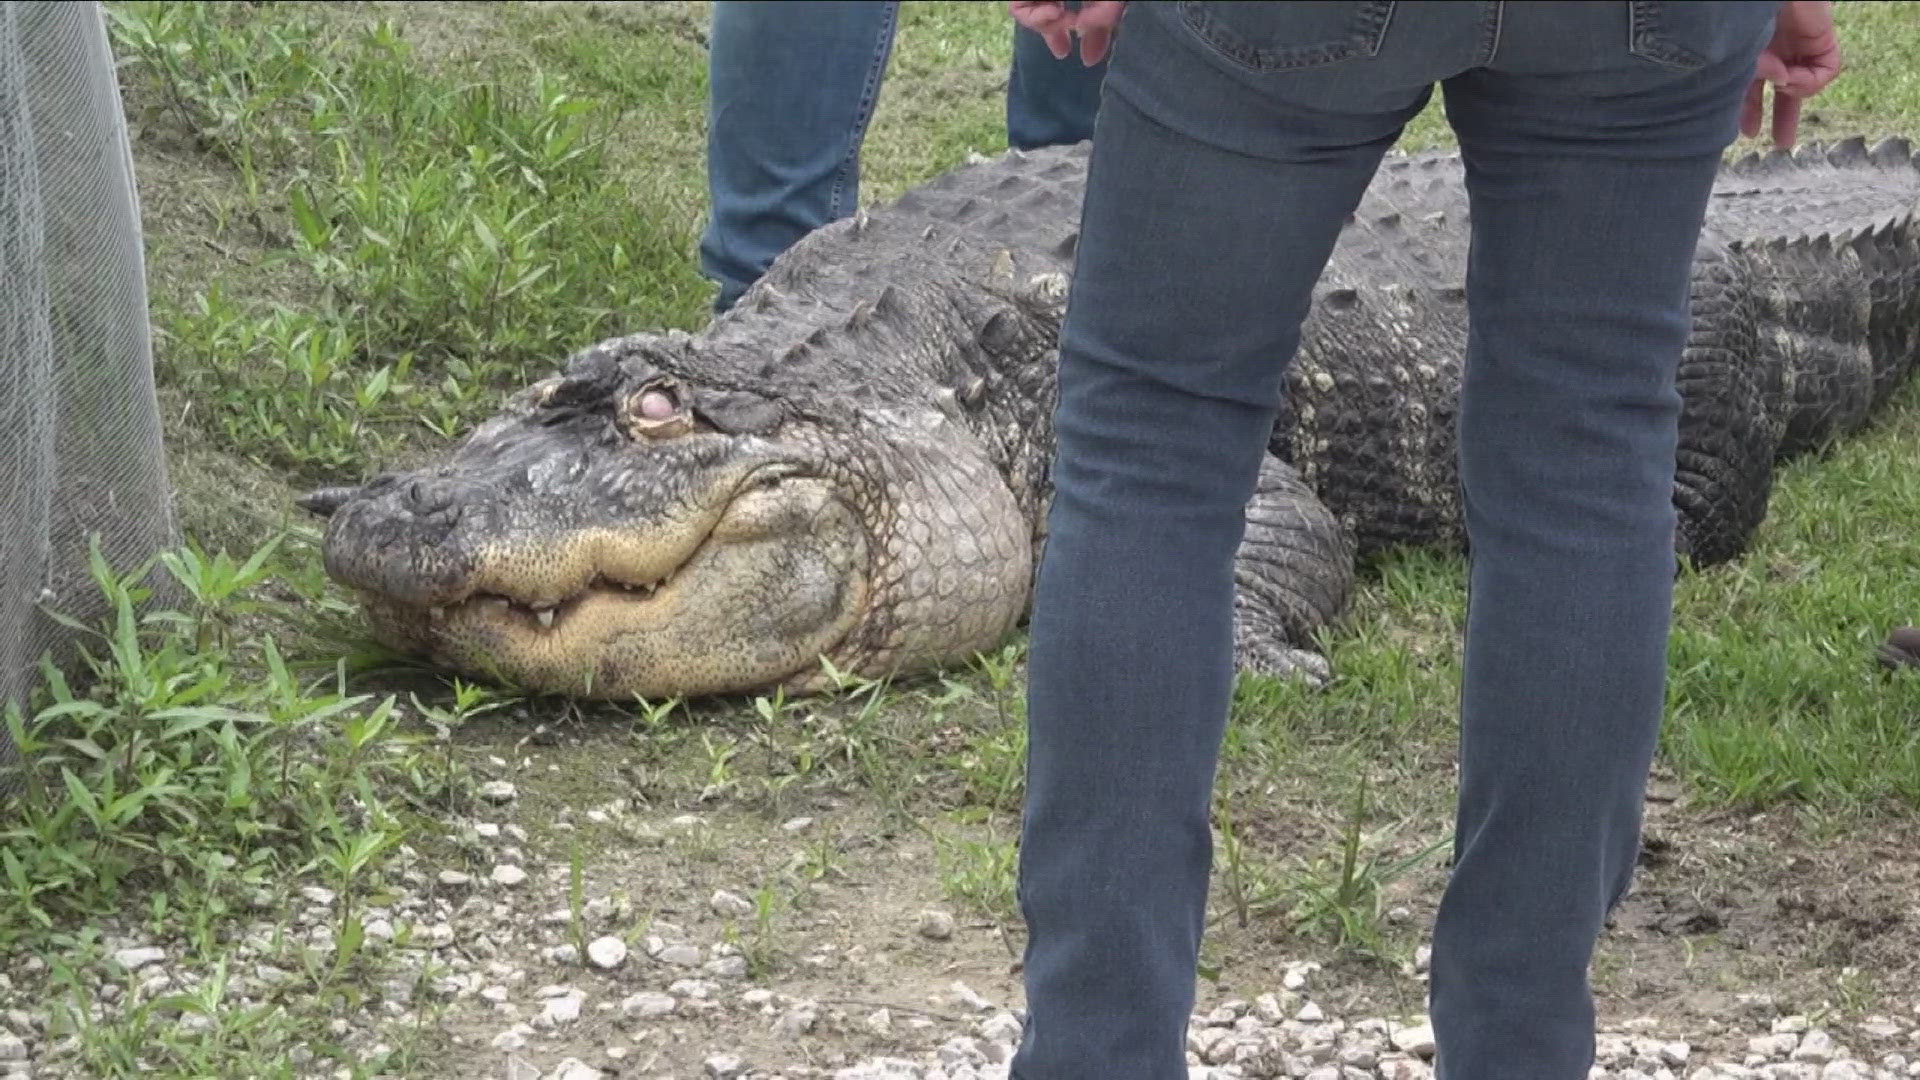 The gator was seized from his owner in March by the New York State Department of Environmental Conservation.